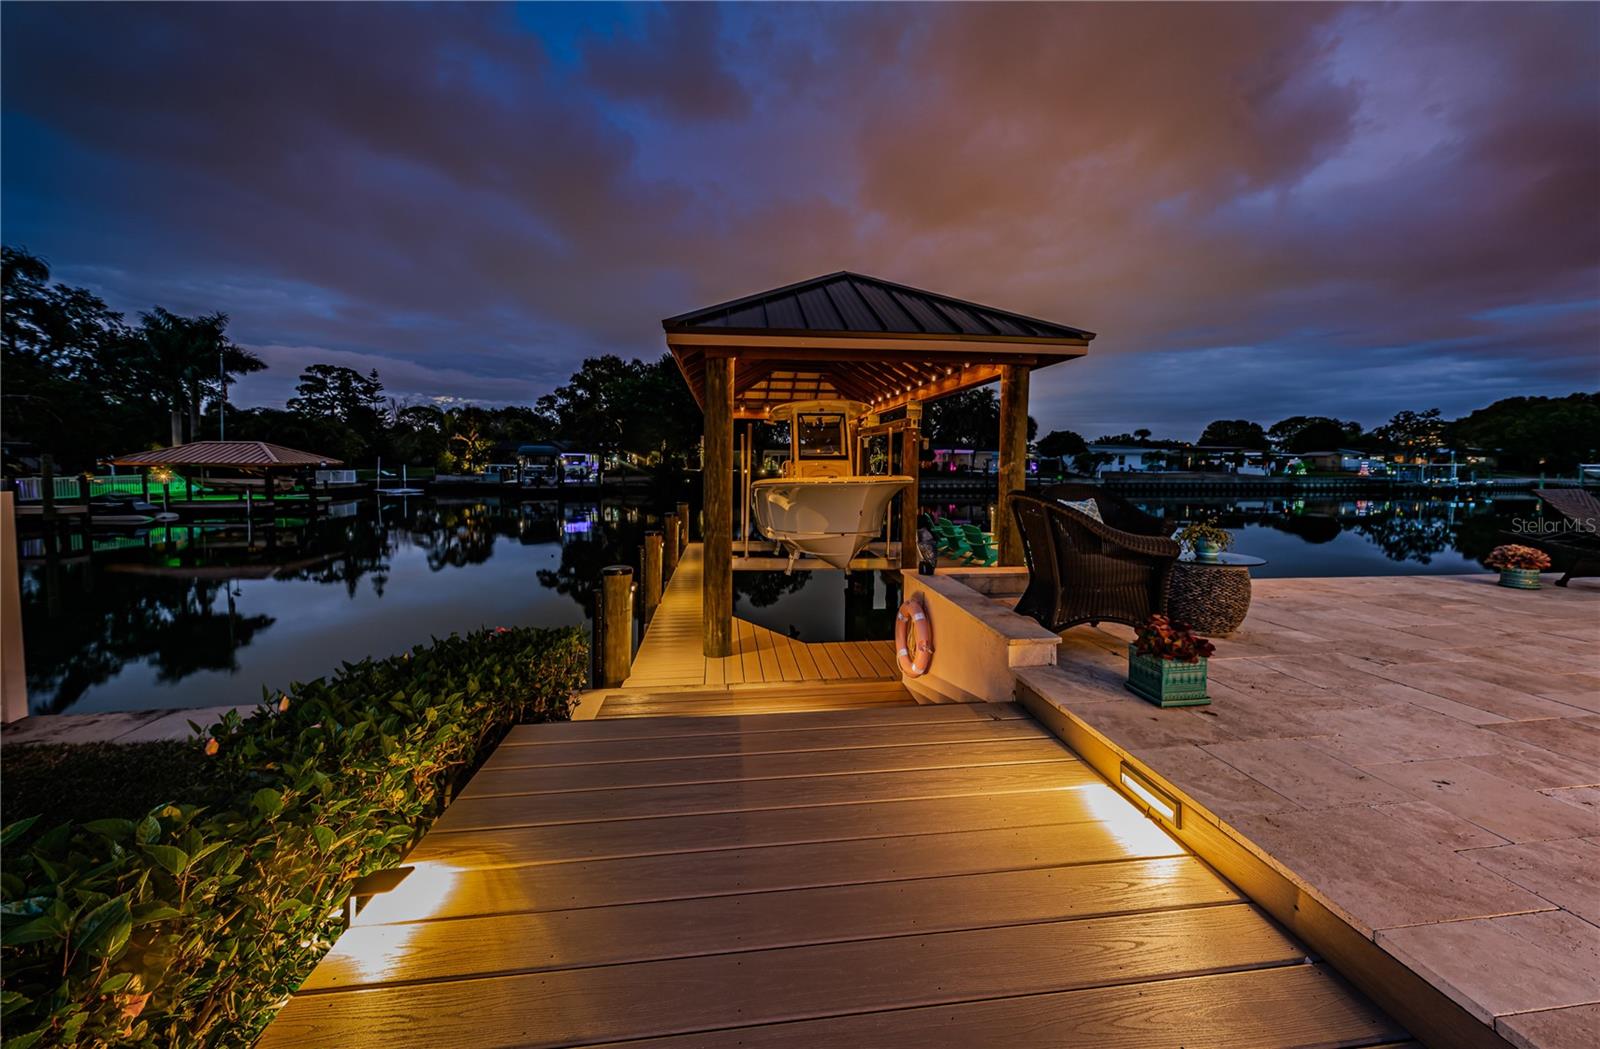 Well lit and landscaped yard and boat dock.